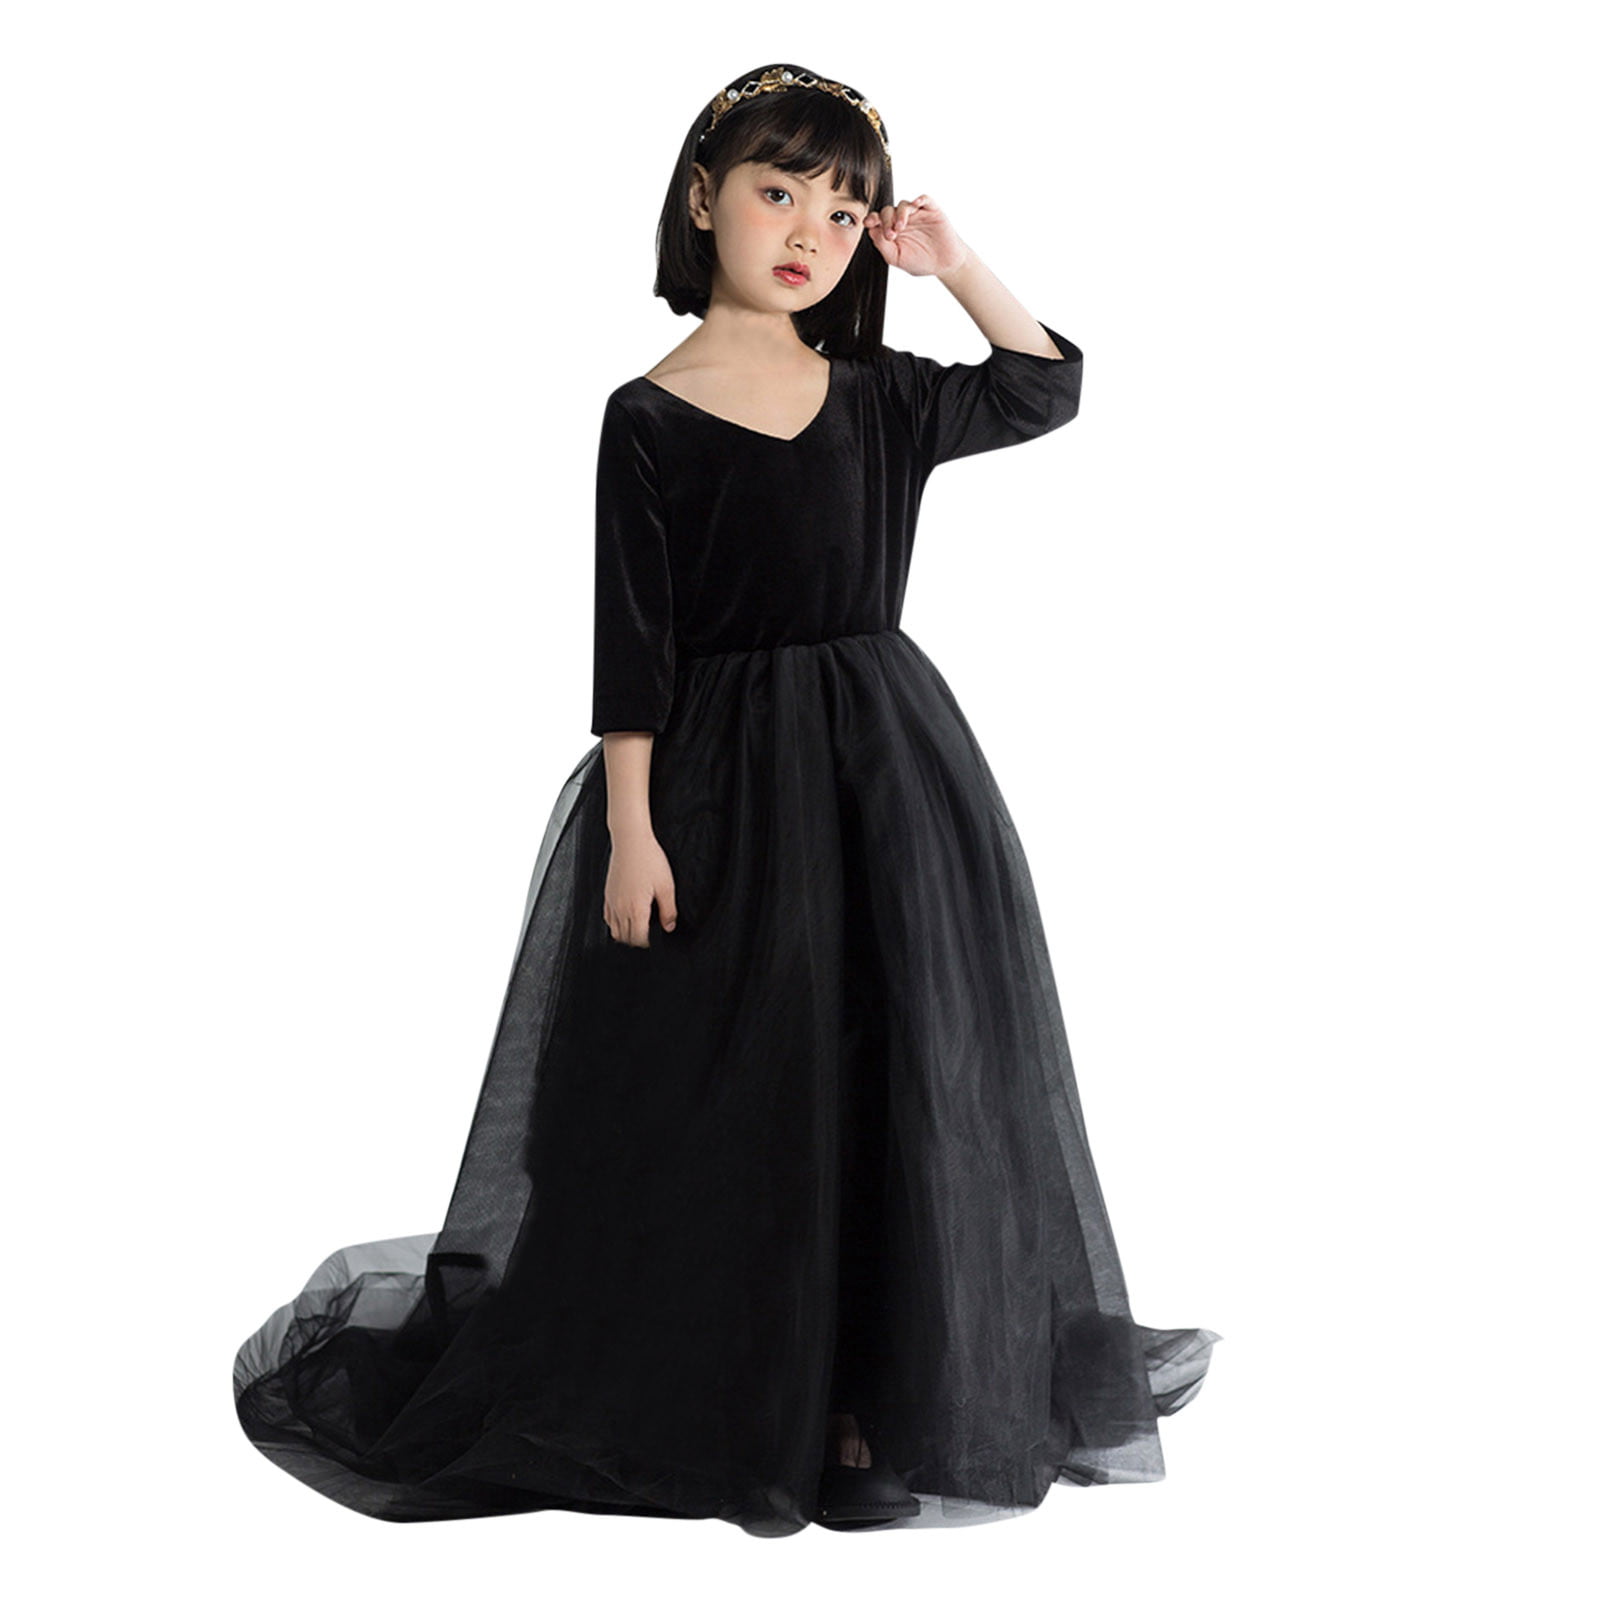 2019 Sexy Elegant Long Evening Gowns Satin Fabric Black Girl Western  Country Style For Woman Dress Gold Prom Formal Dresses Mermaid From  Aiyawedding, $116.69 | DHgate.Com